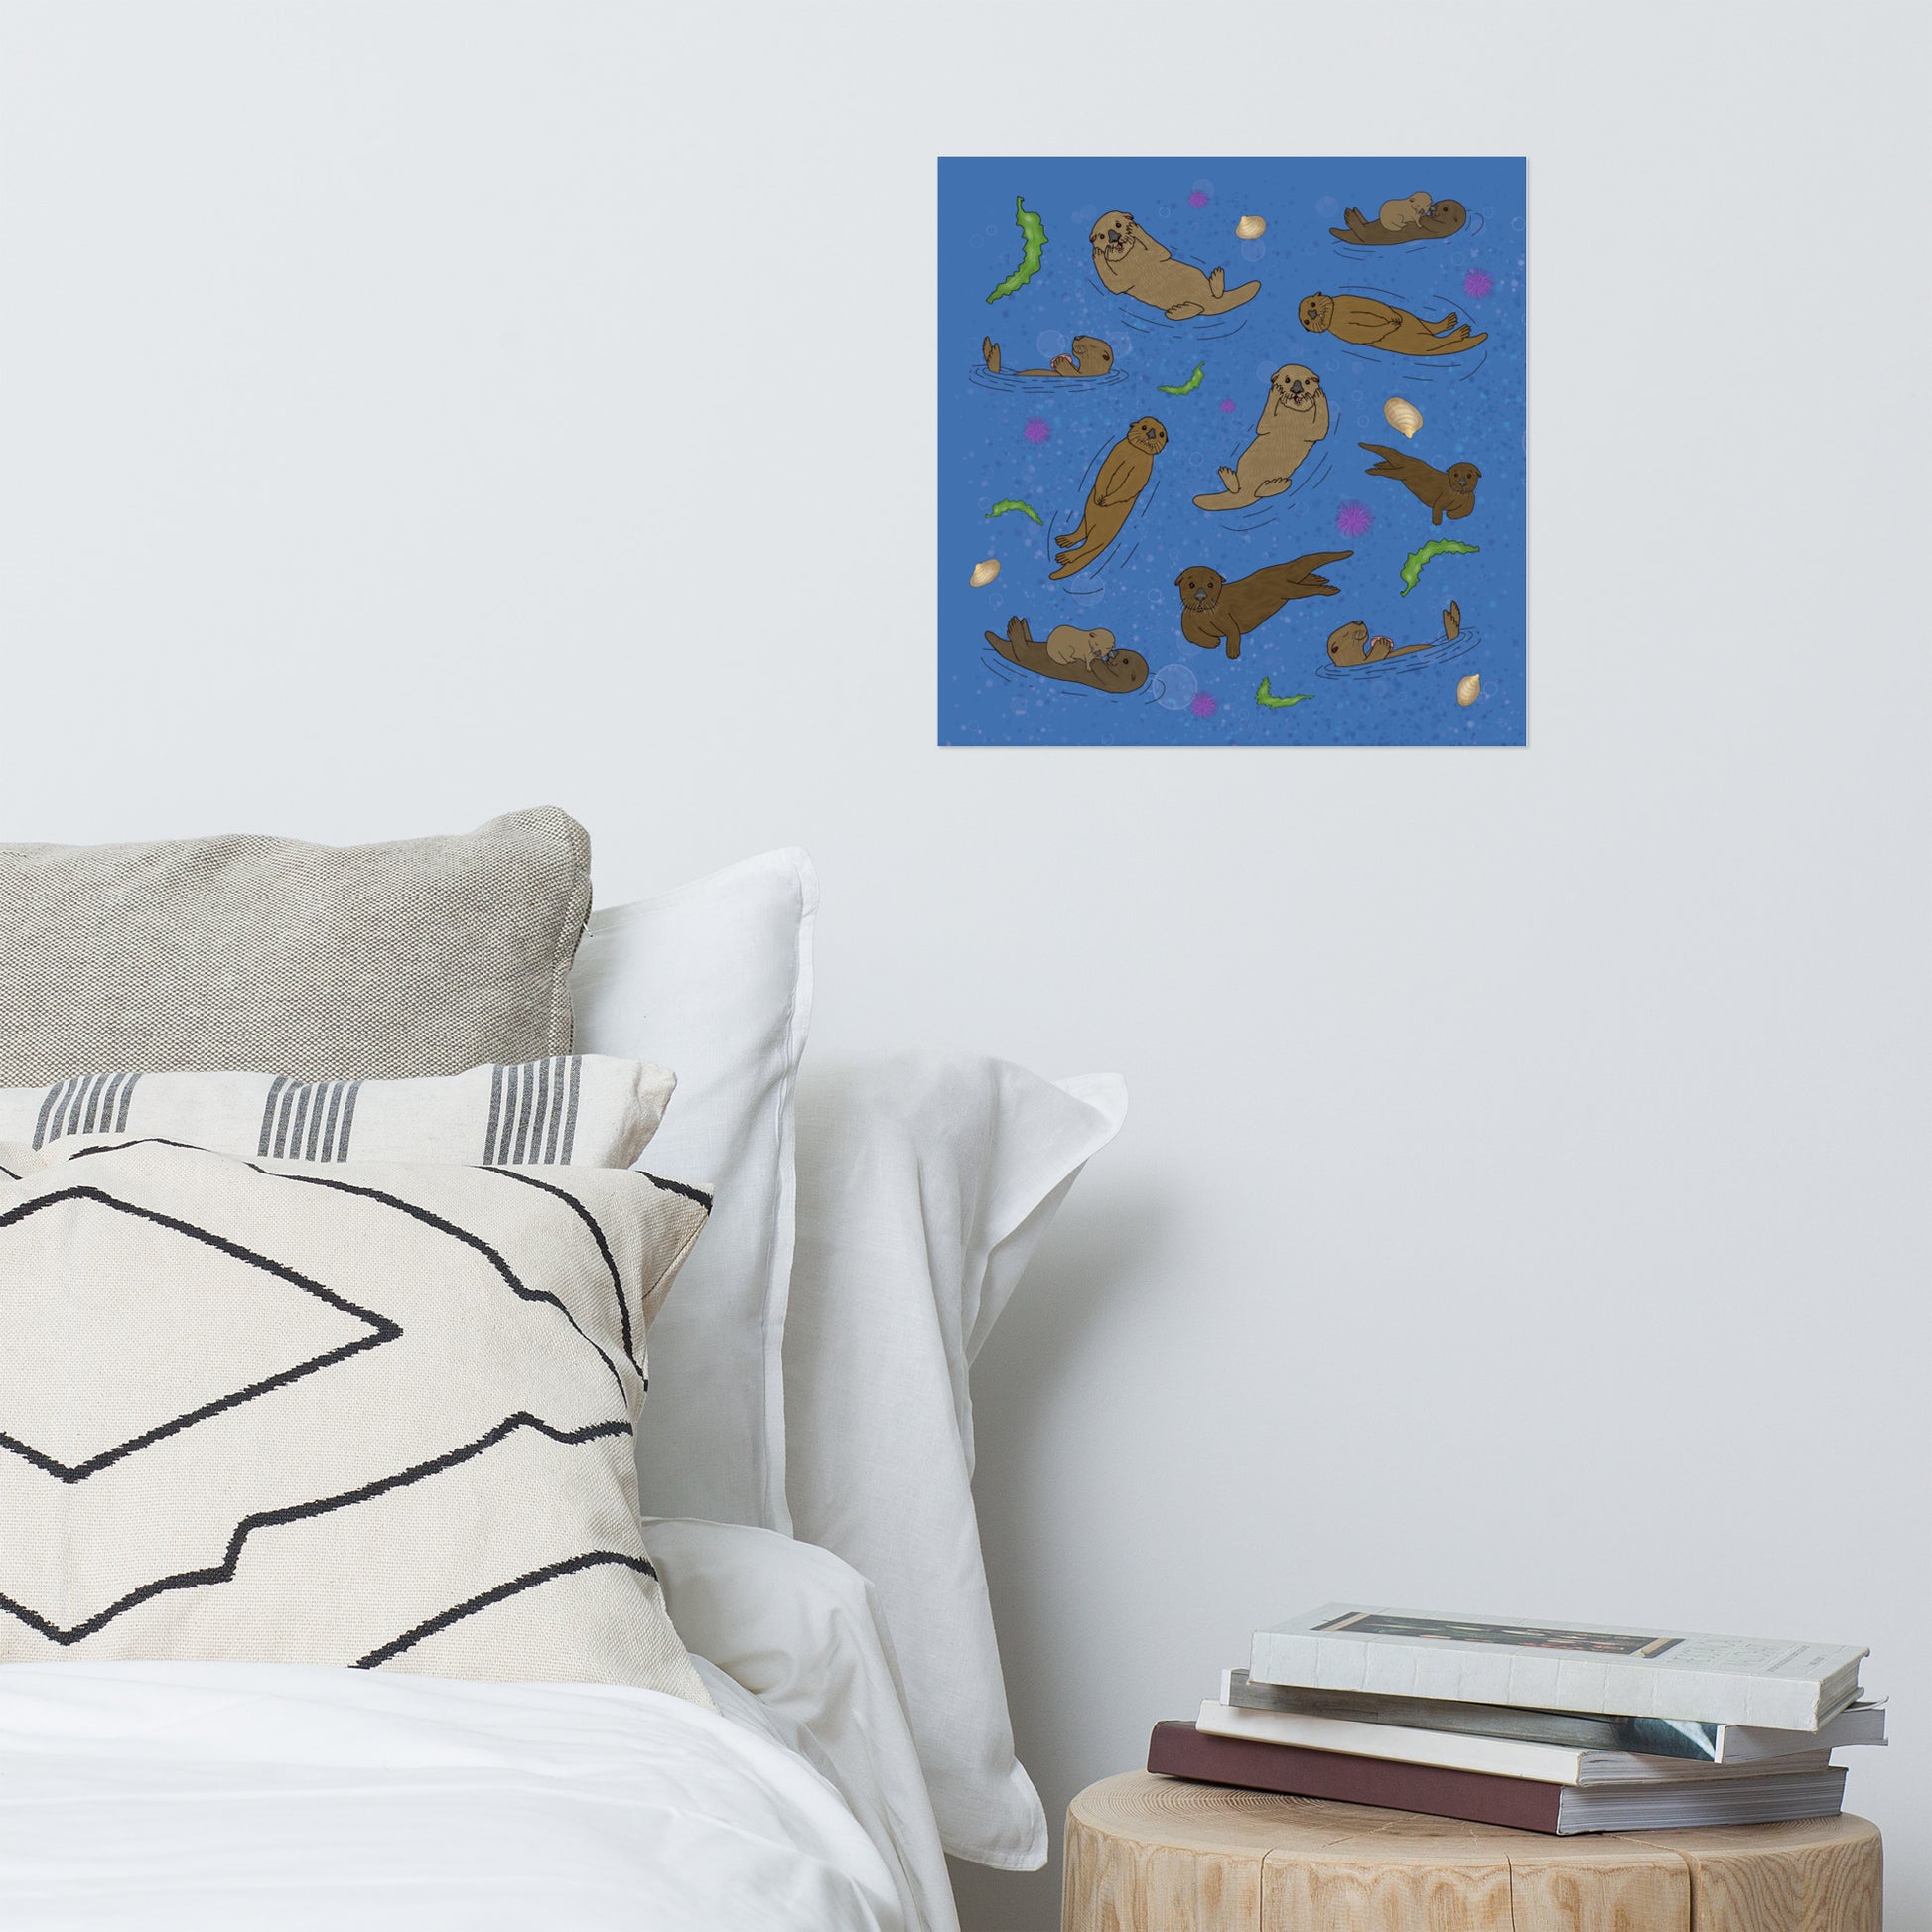 16 x 16 inch matte poster art print. Hand illustrated digital drawing of cute sea otters with accenting seashells, seaweed, and sea urchins on a blue background. Shown on wall above bed and nightstand with books.